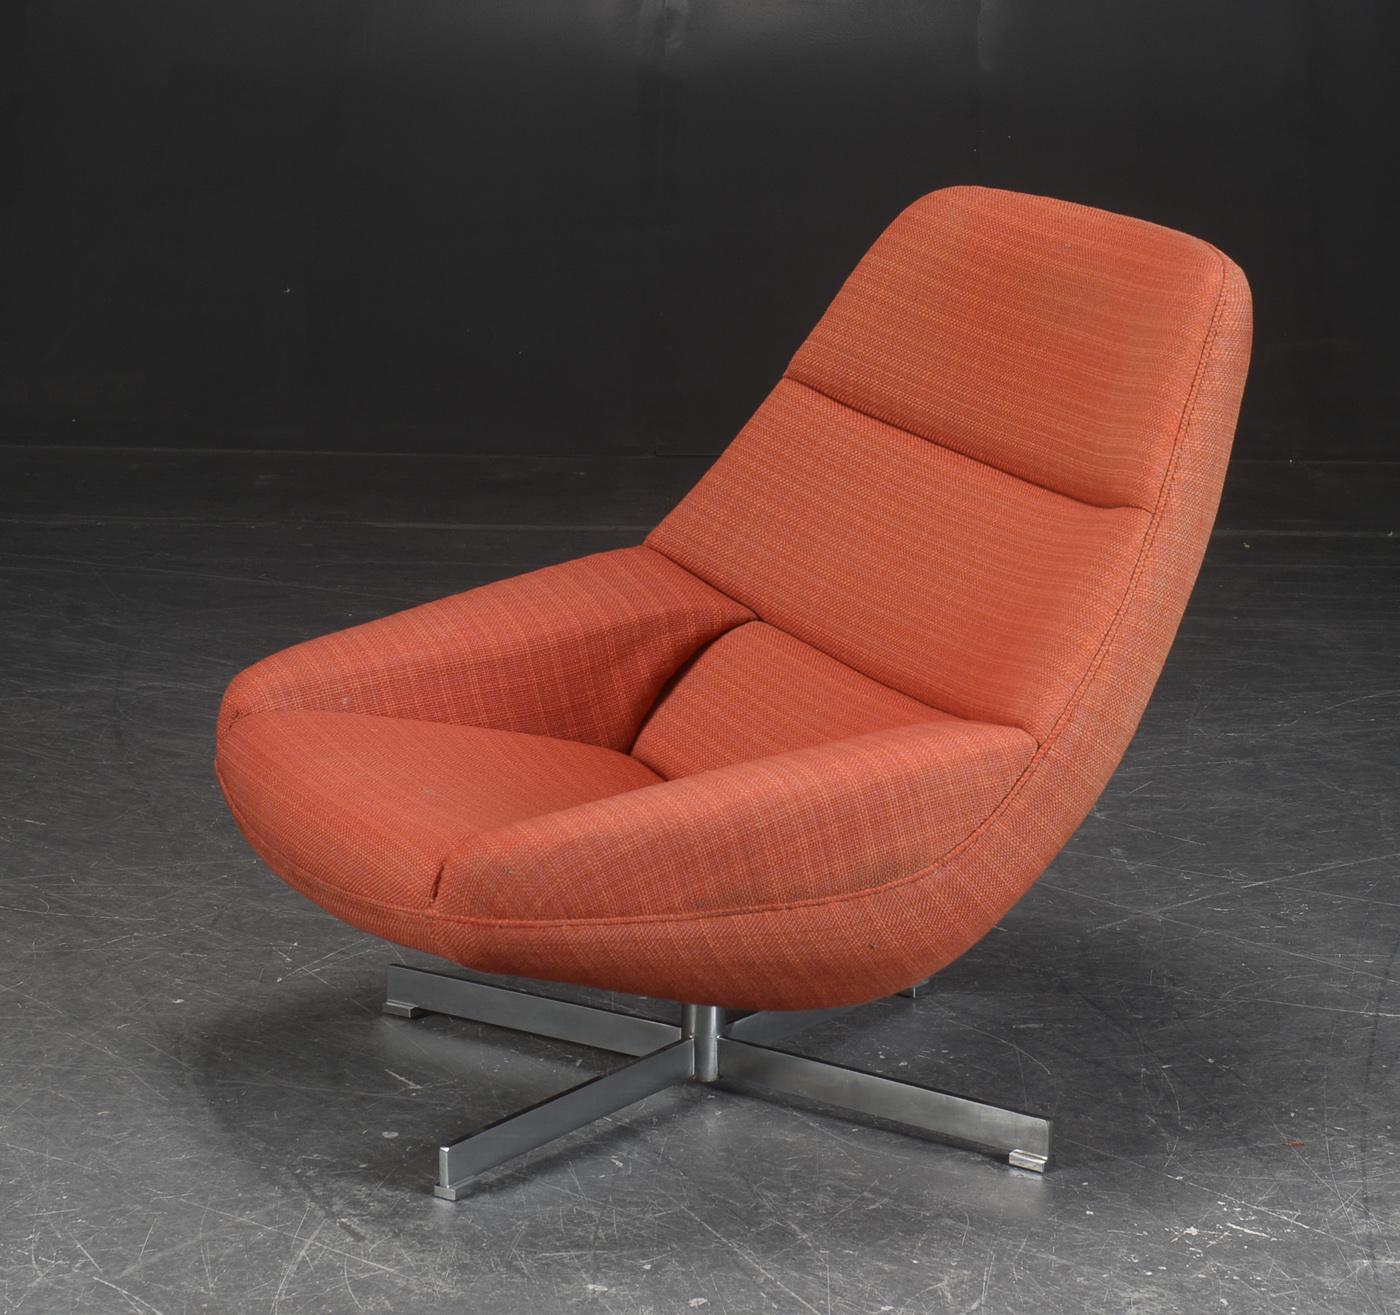 Rare Illum Wikkelso designed swivel model ML91 lounge chair produced by A. Mikael Laursen circa 1960 in Denmark. This is rare variant of the ML91 with an aluminum swivel base where the model normally is found with a scissor base of solid teak or